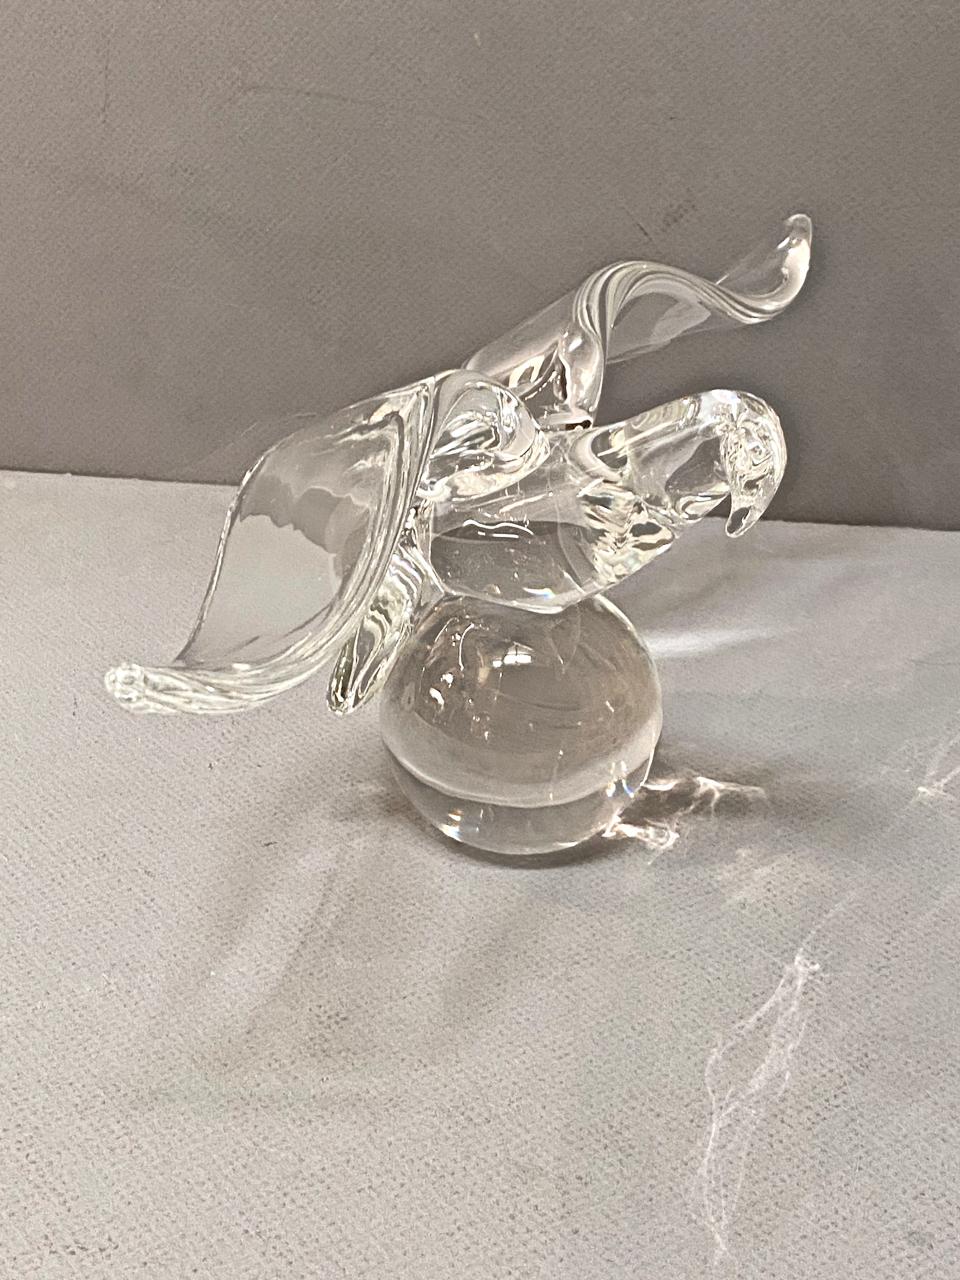 This a beautiful example of a Steuben animal figure. The beauty and balance of the outswept wings of the eagle in flight are soul inspiring. The Steuben quality of glass is recognized across the globe. This eagle is in overall very good condition.